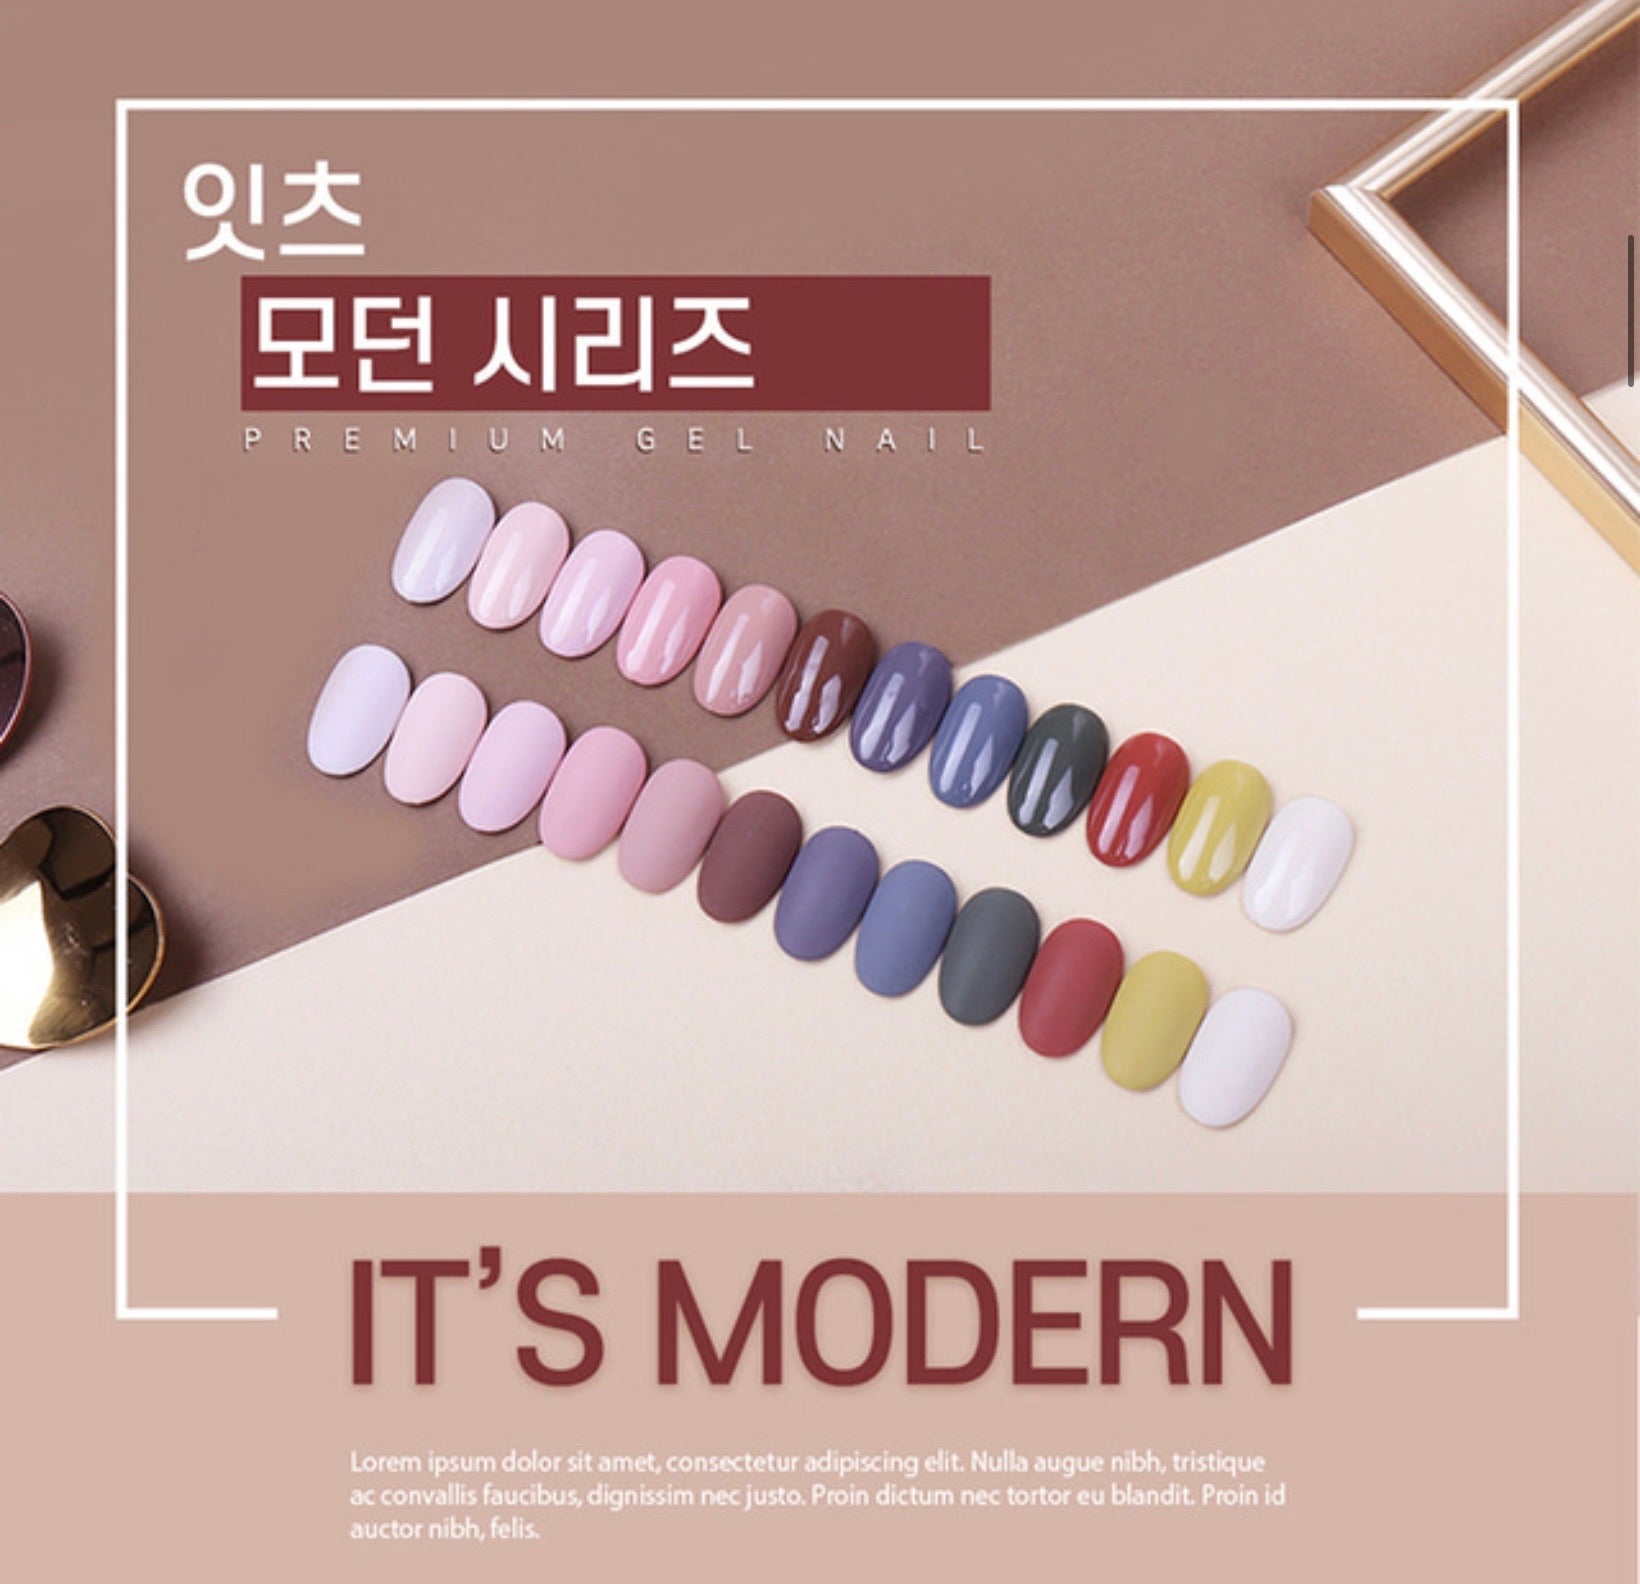 THE GEL it’s modern collection